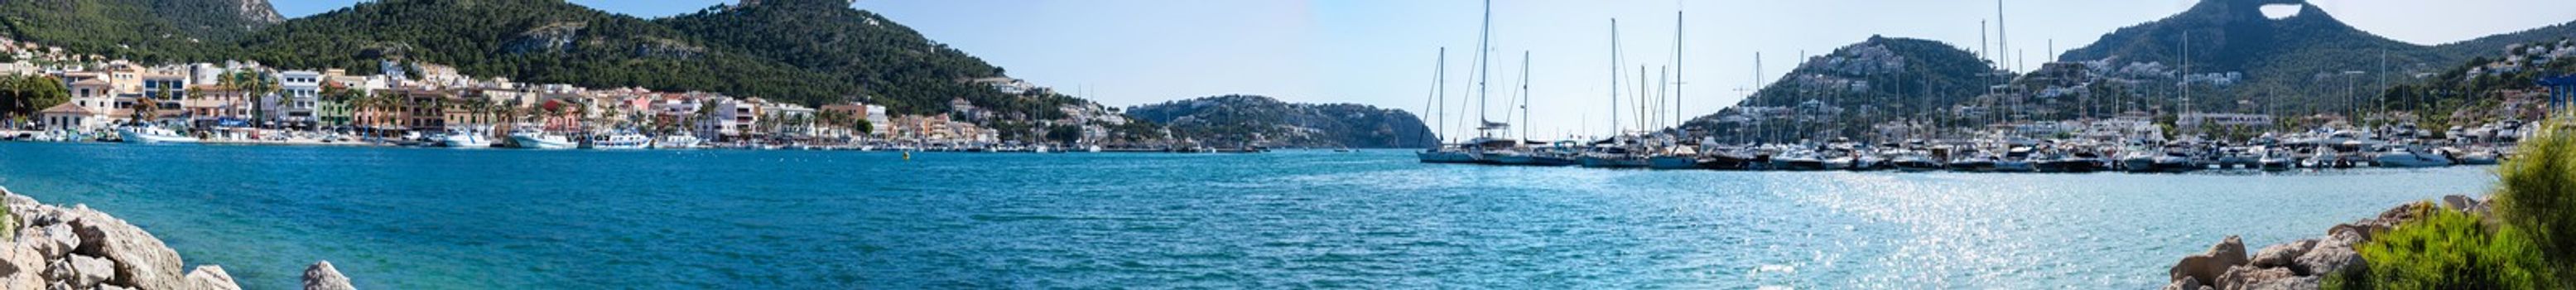 Panoramic view of the bay with the marina of Port Andratx Mallorca Baleares Spain.